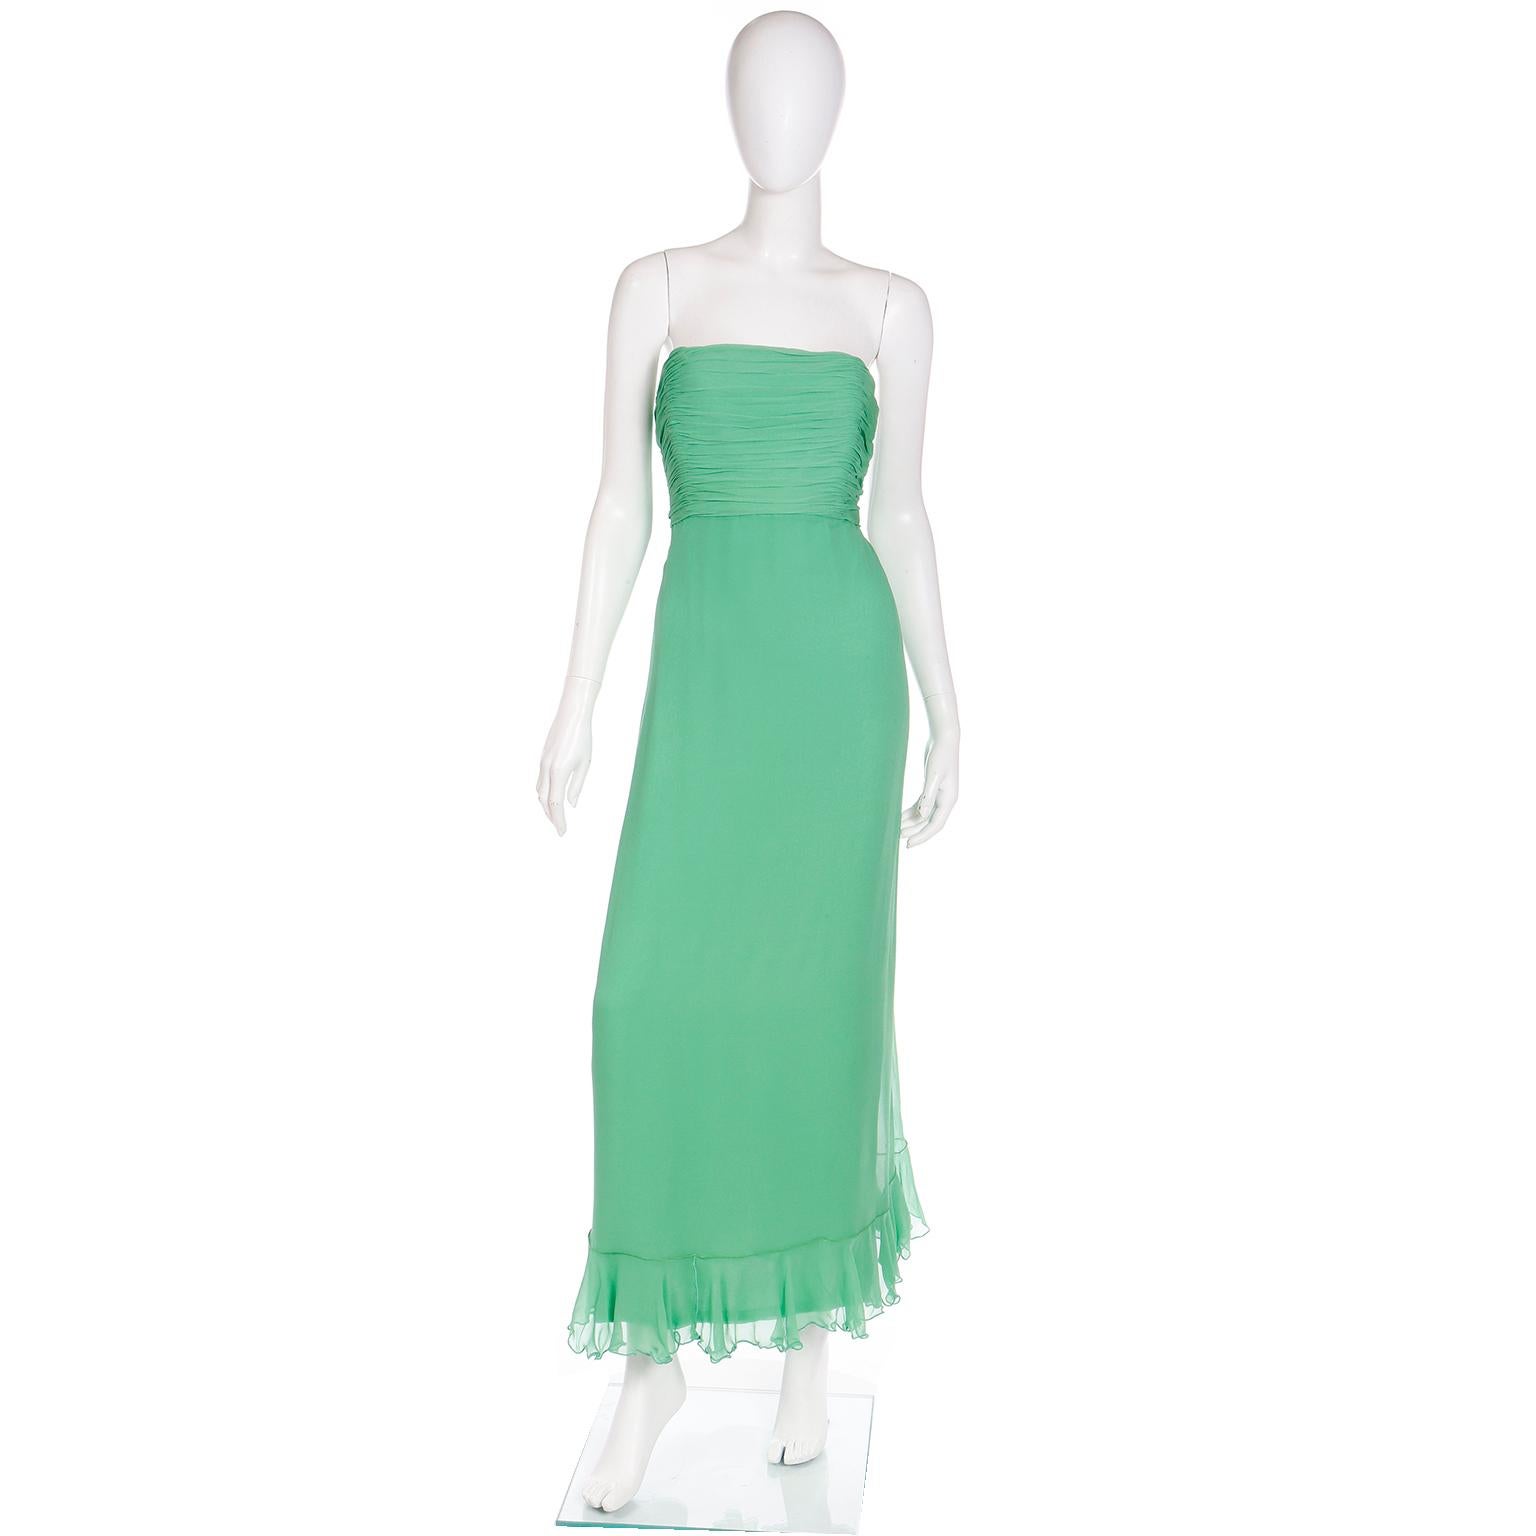 This elegant full length green silk chiffon Wayne Clark dress was purchased at the couture boutique Harriet Kassman in Washington DC. The dress is strapless with a ruched bodice and it comes with a ruffled shawl that can be worn in a number of